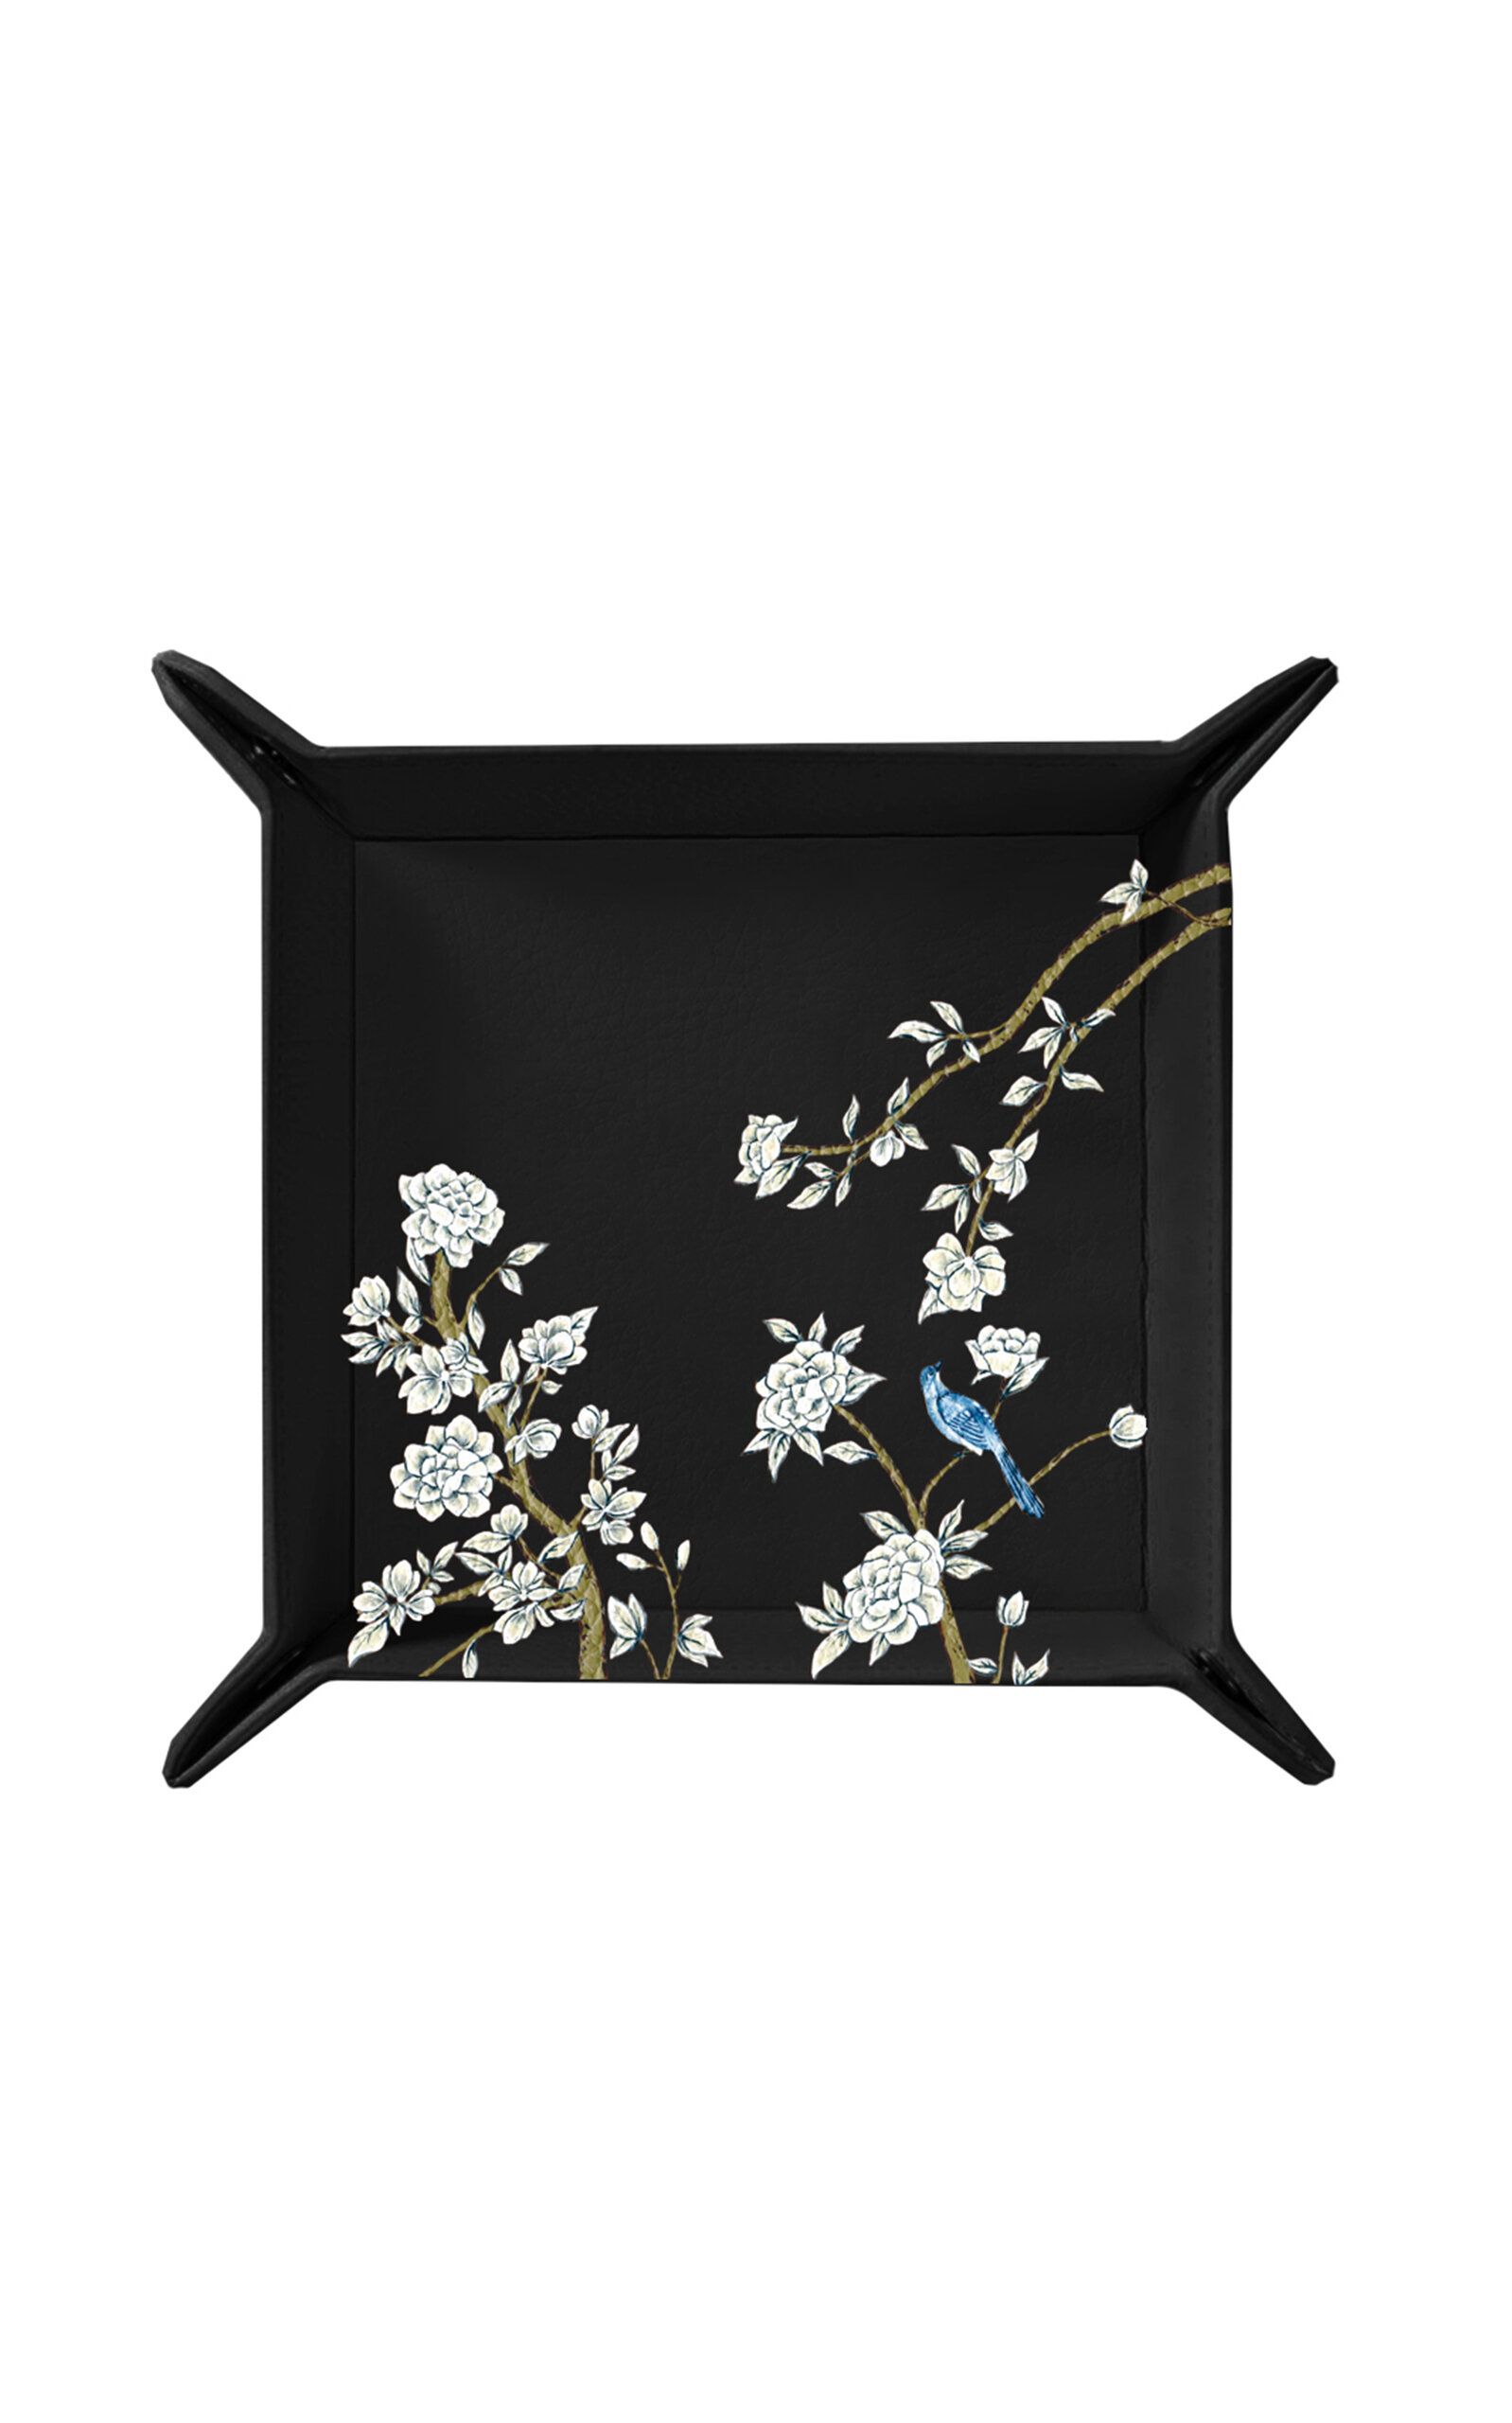 Alepel Japanese Garden Leather Tray In Black